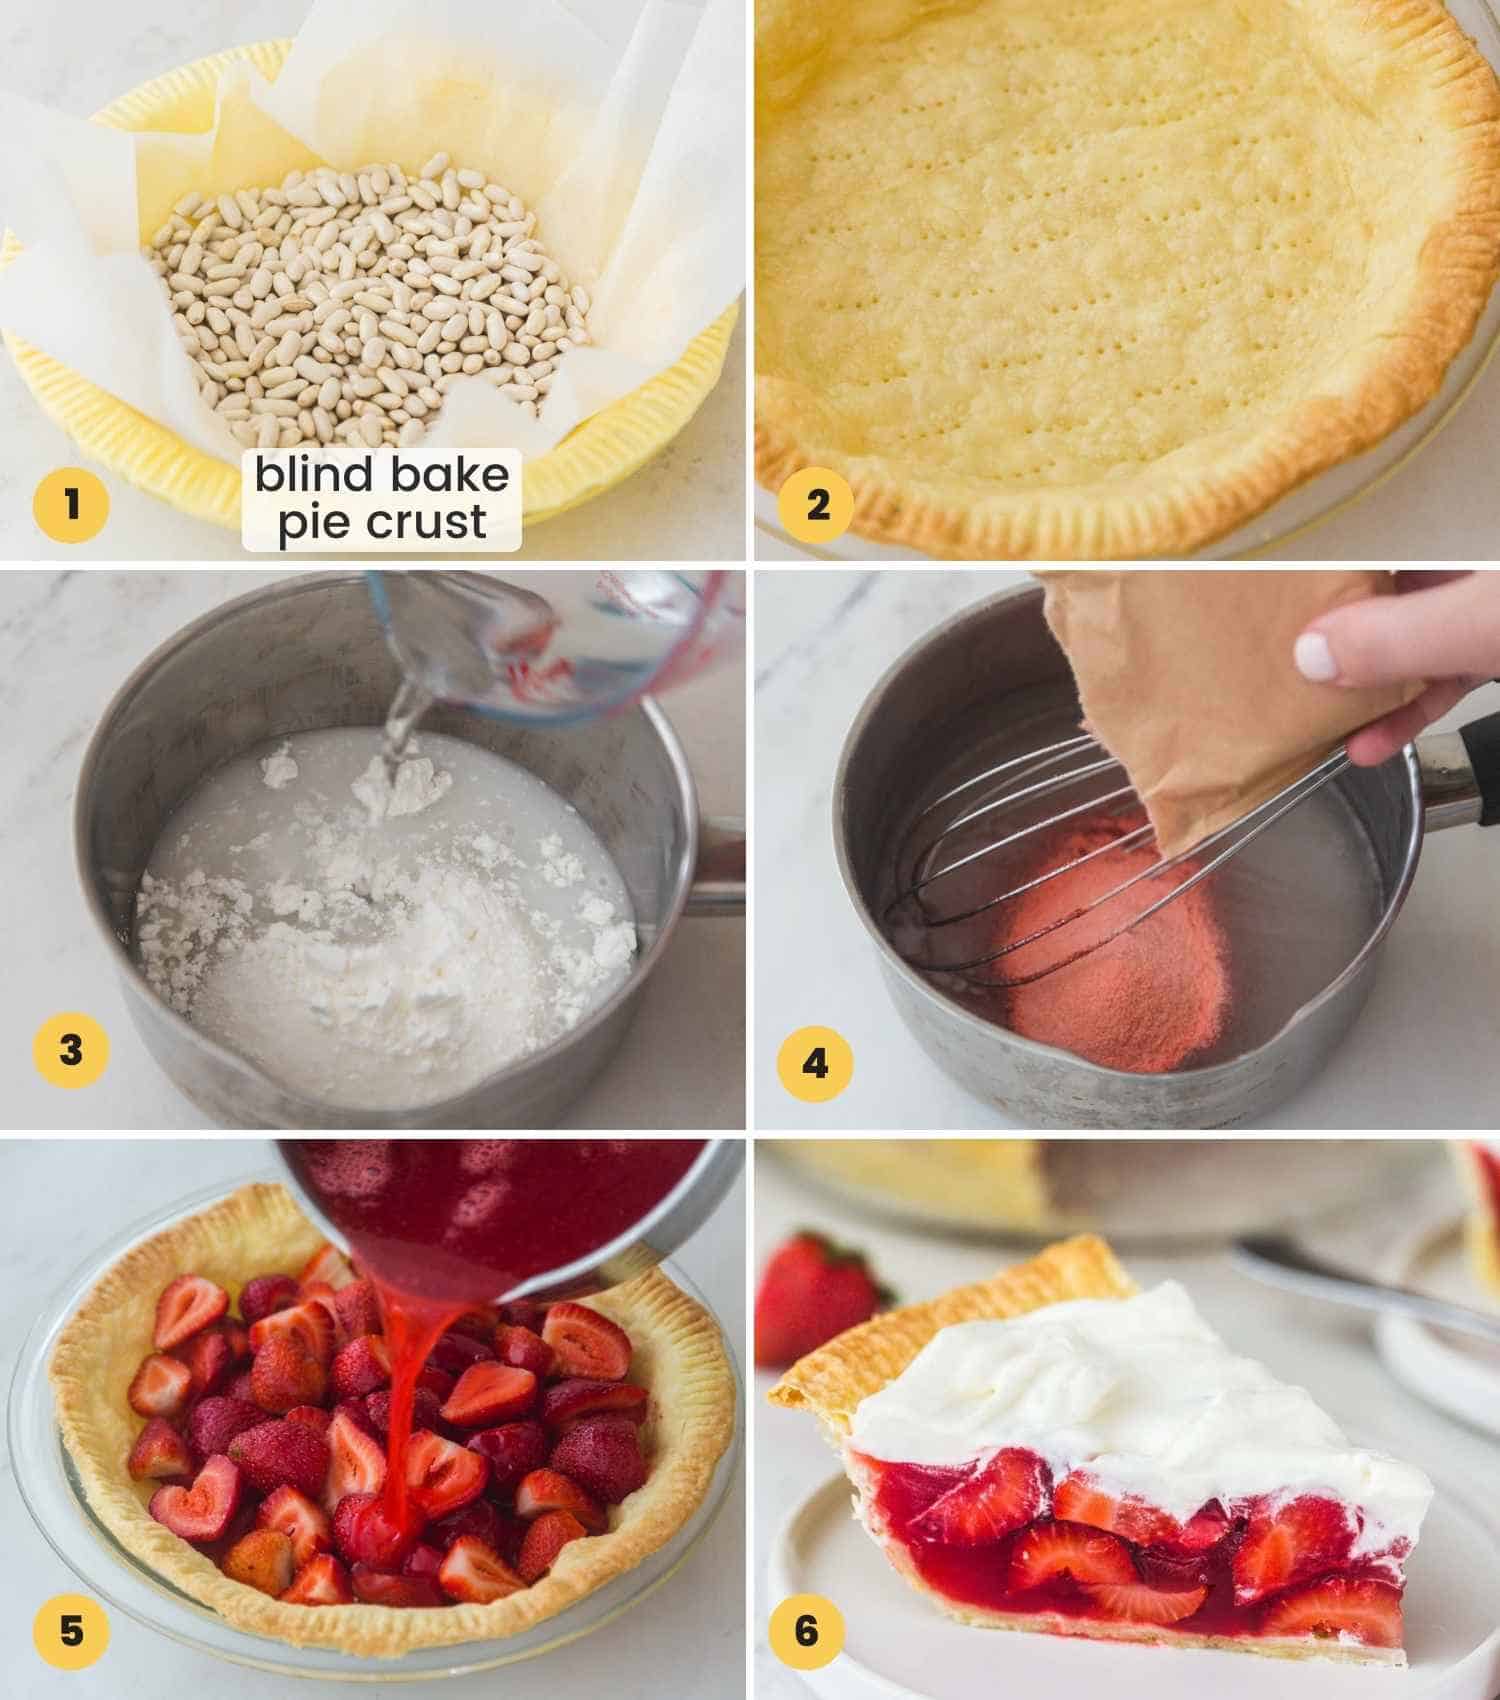 Collage with four images showing how to make strawberry pie by blind baking the pie crust, then making the filling.